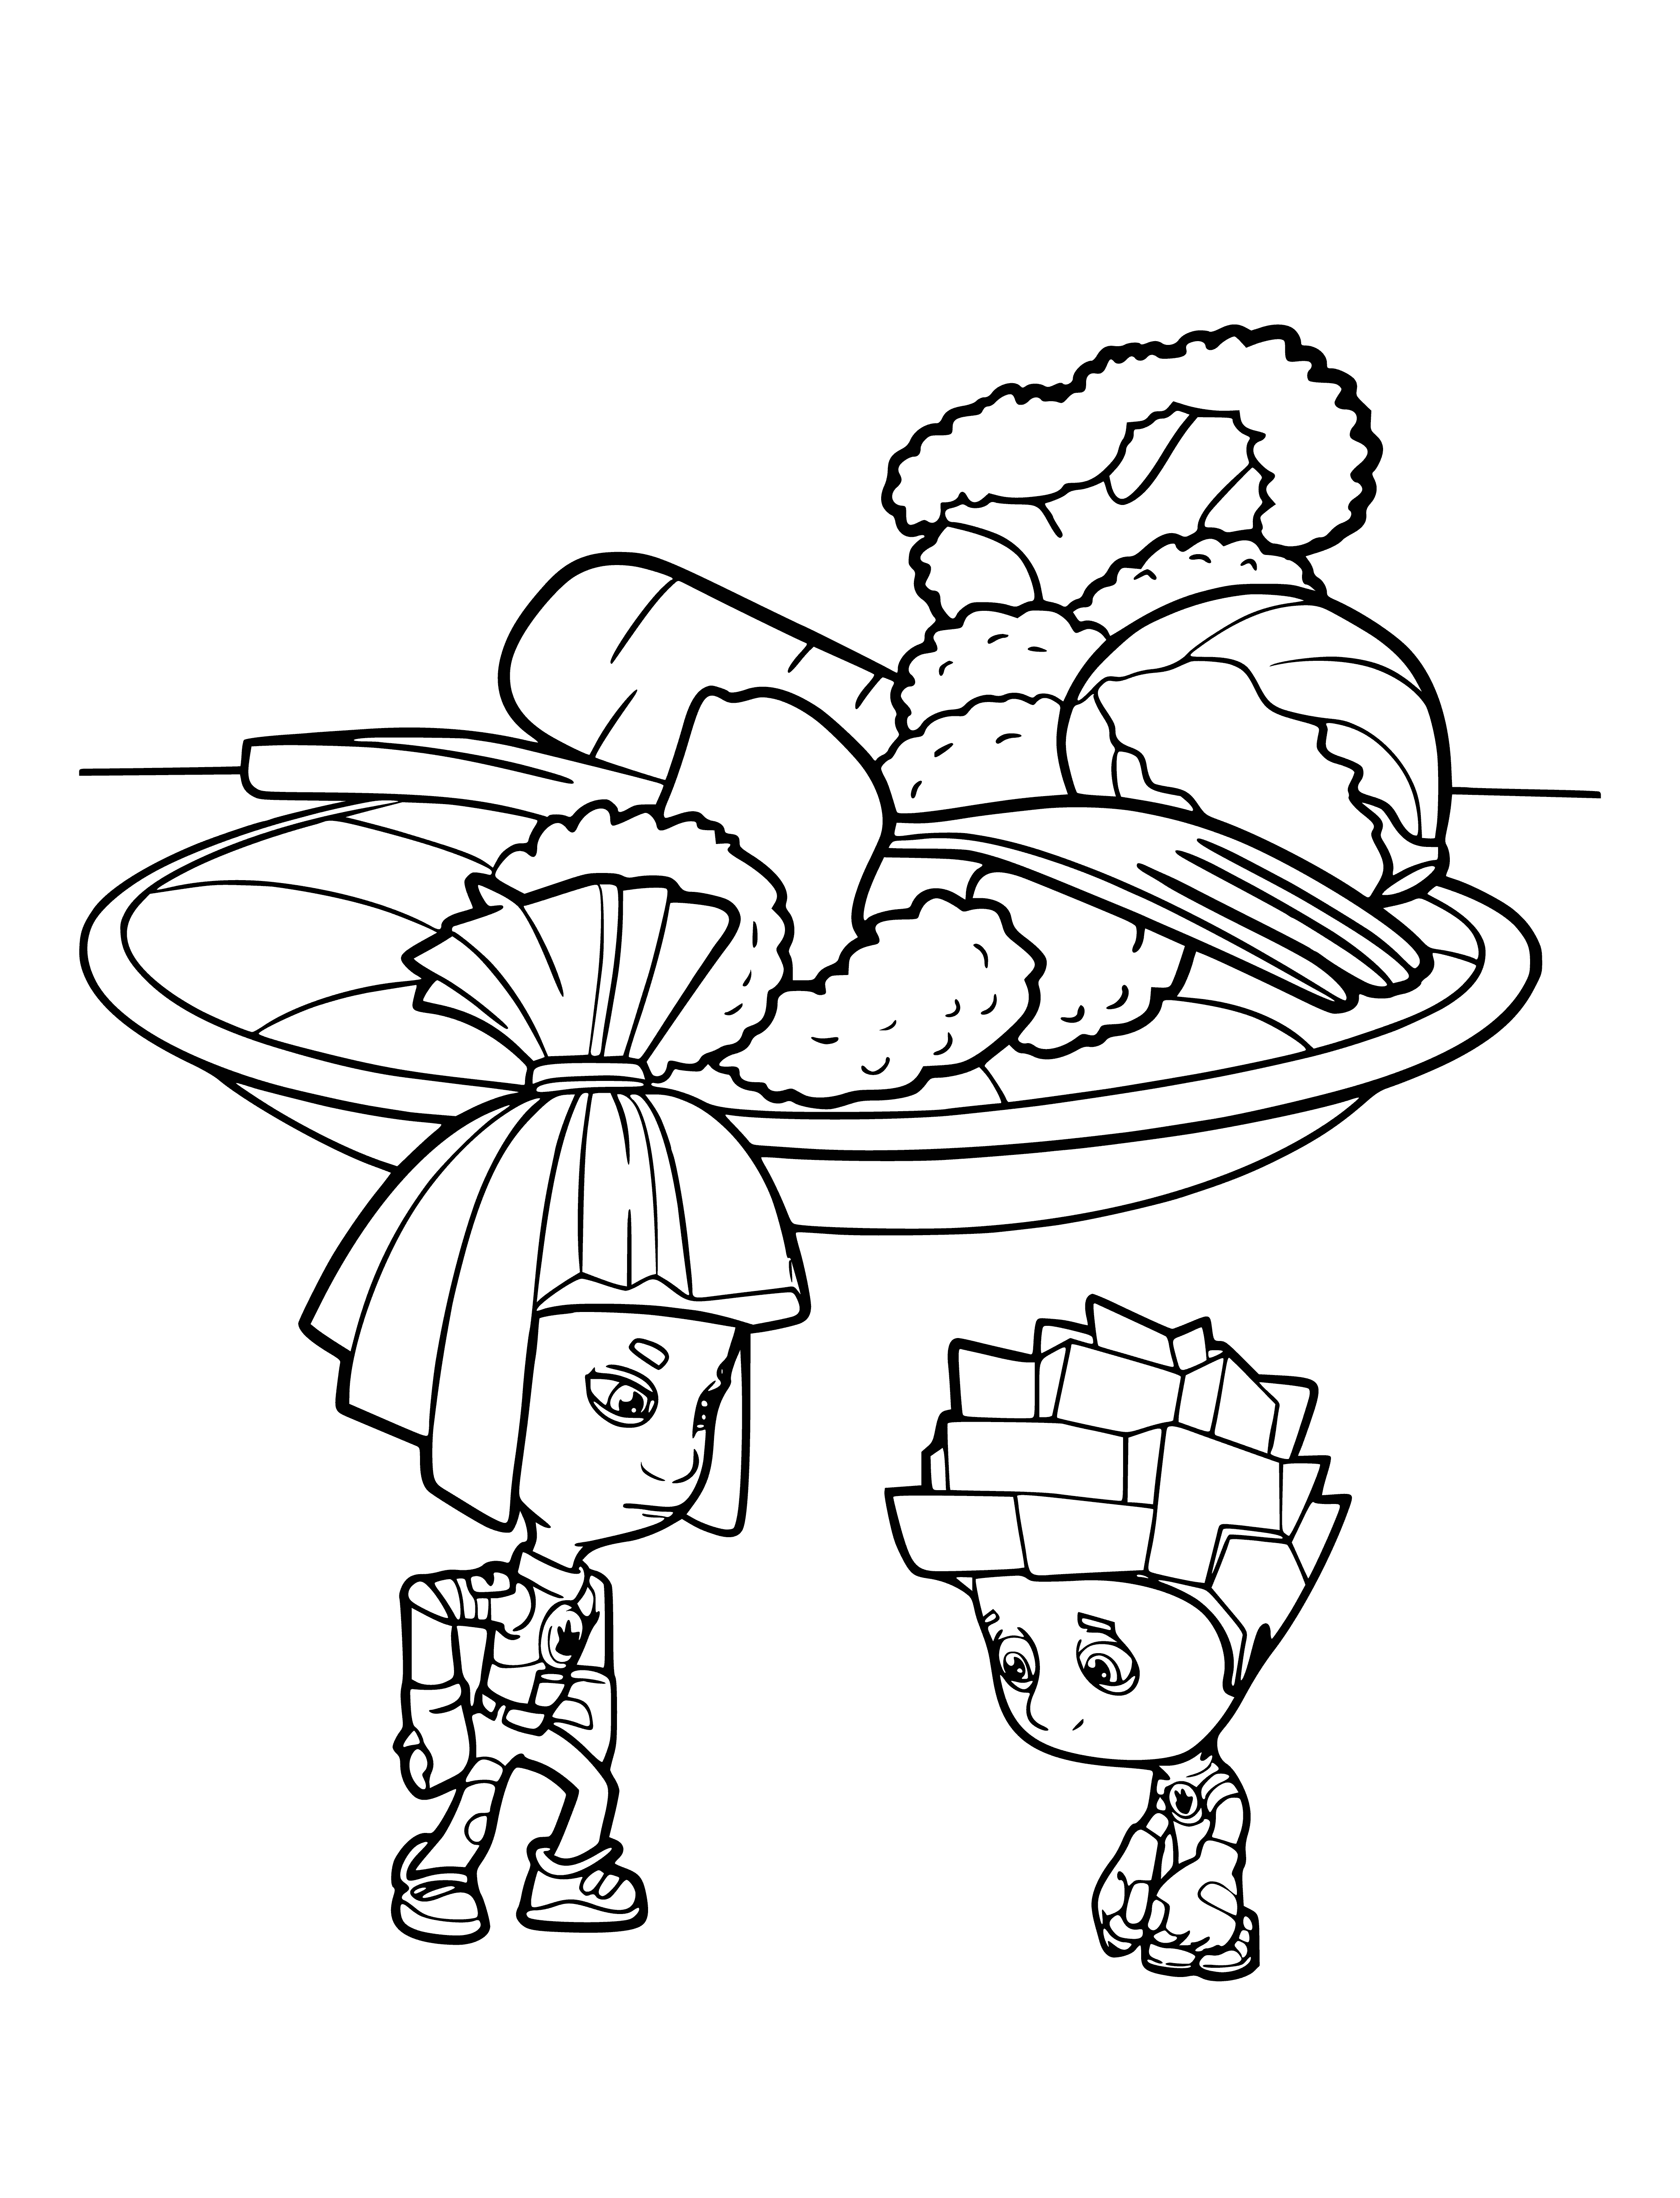 Two metal creatures stand hand in hand, big headed & small bodies, 2 legs & 2 arms each. #ColoringPage